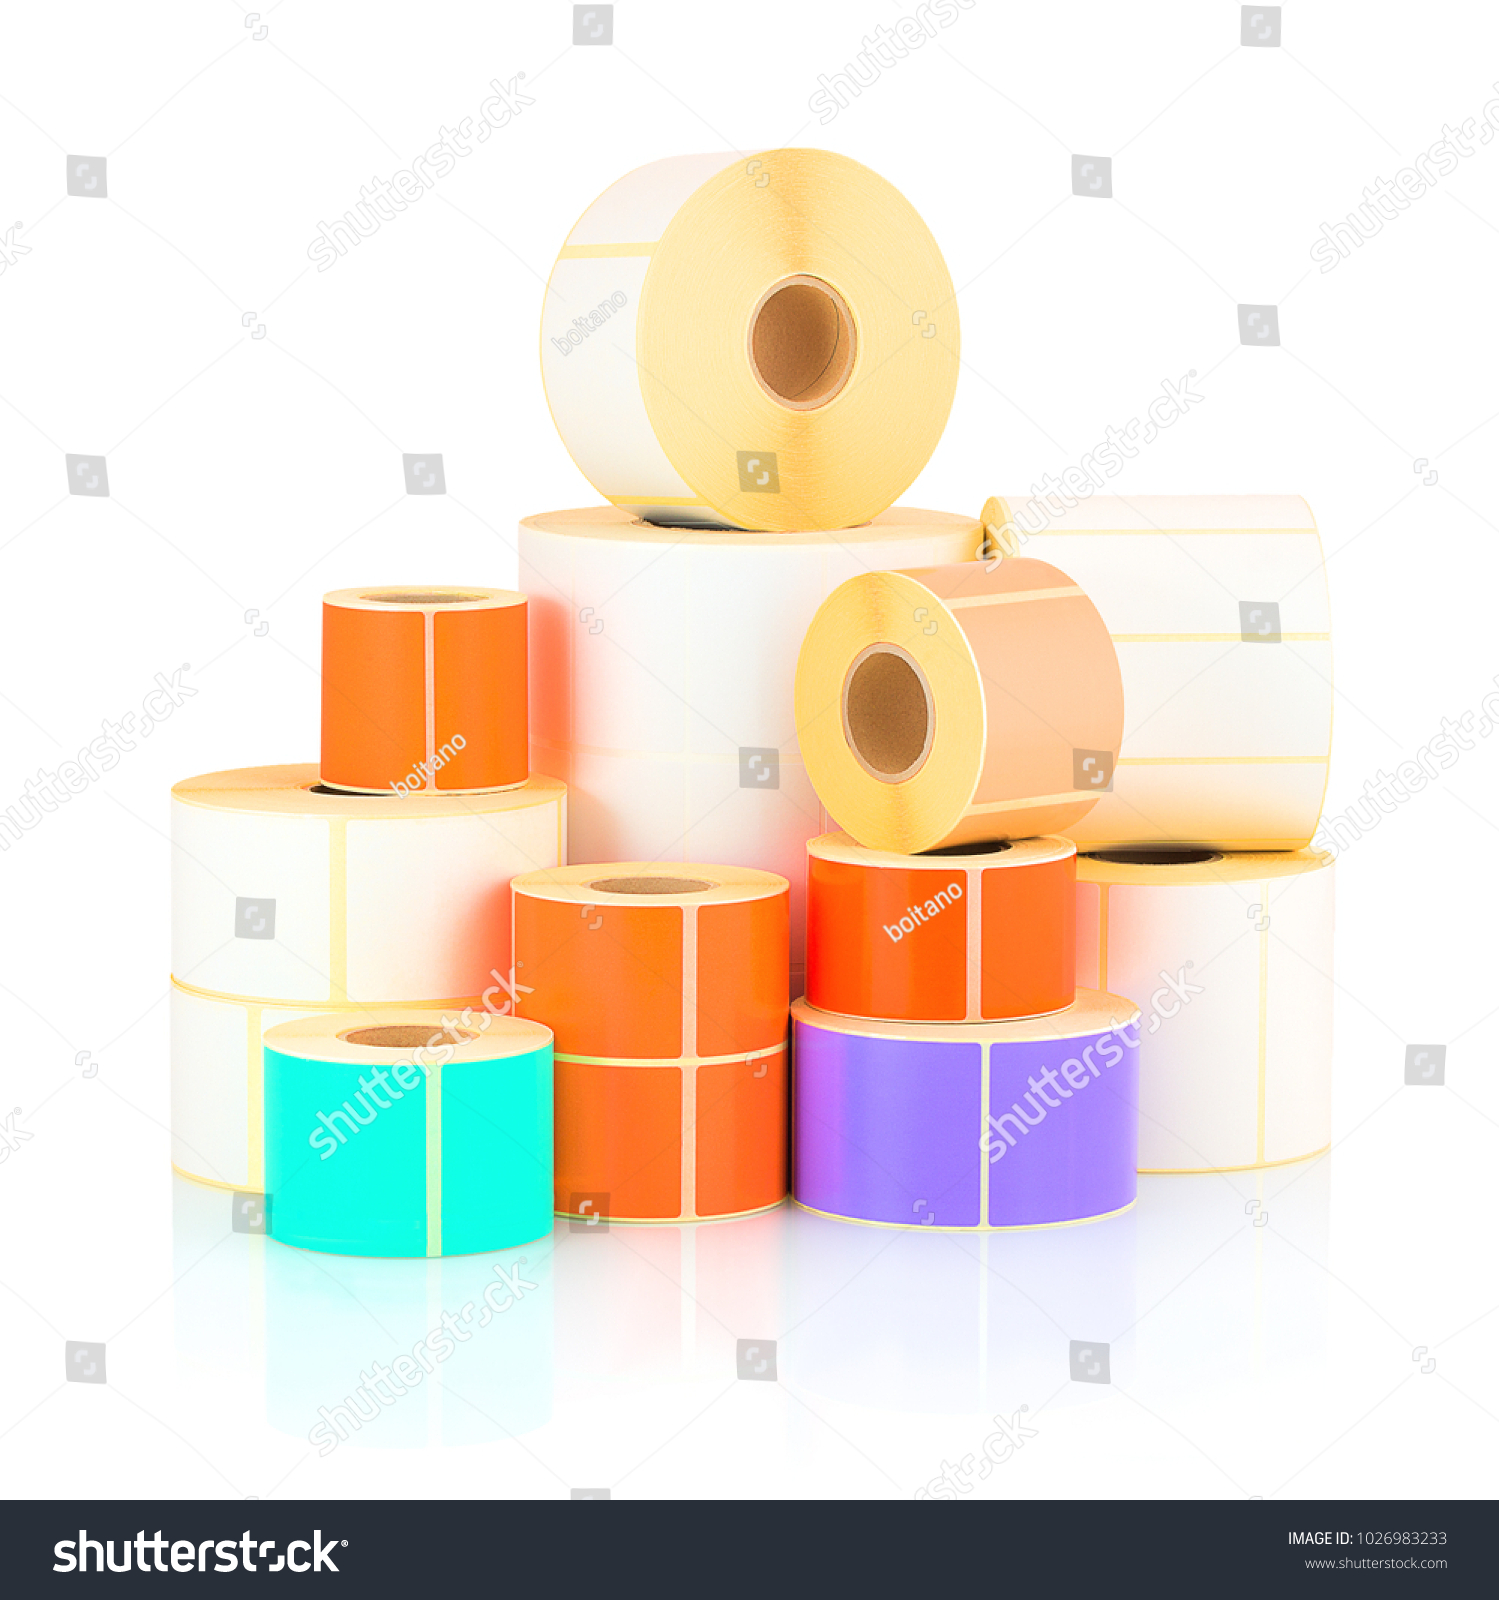 White and colored label rolls isolated on white background with shadow reflection. Color reels of labels for printers. Labels for direct thermal or thermal transfer printing. #1026983233